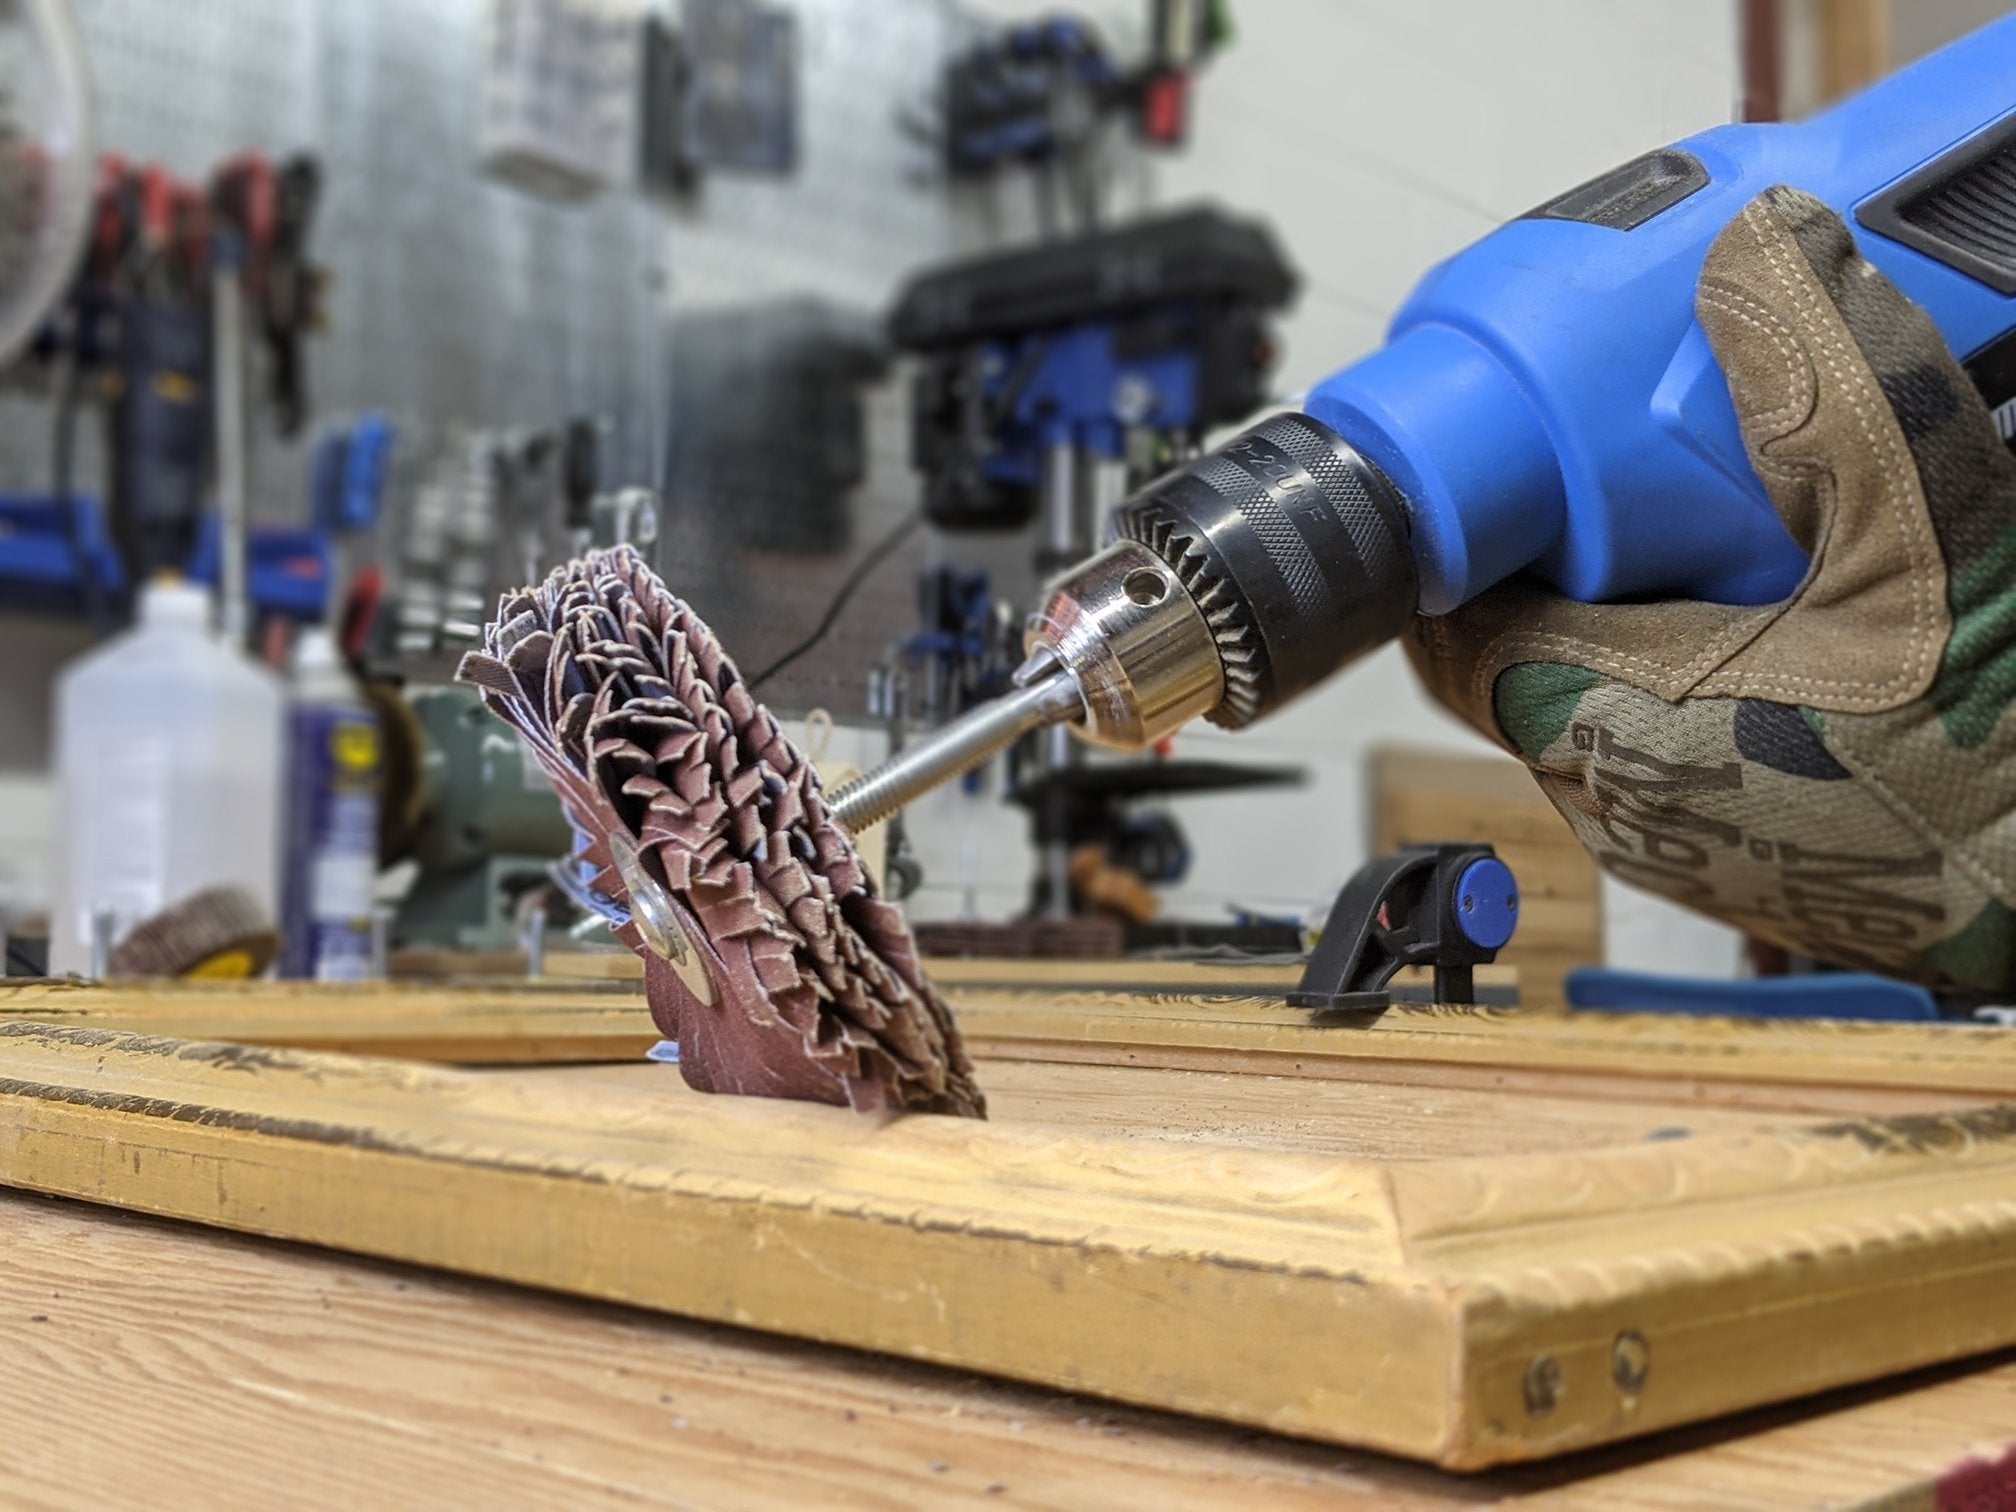 Got a Drill? Here are 3 Sanding Attachments for Drills That Will Save Your Time and Money - LINE10 Tools